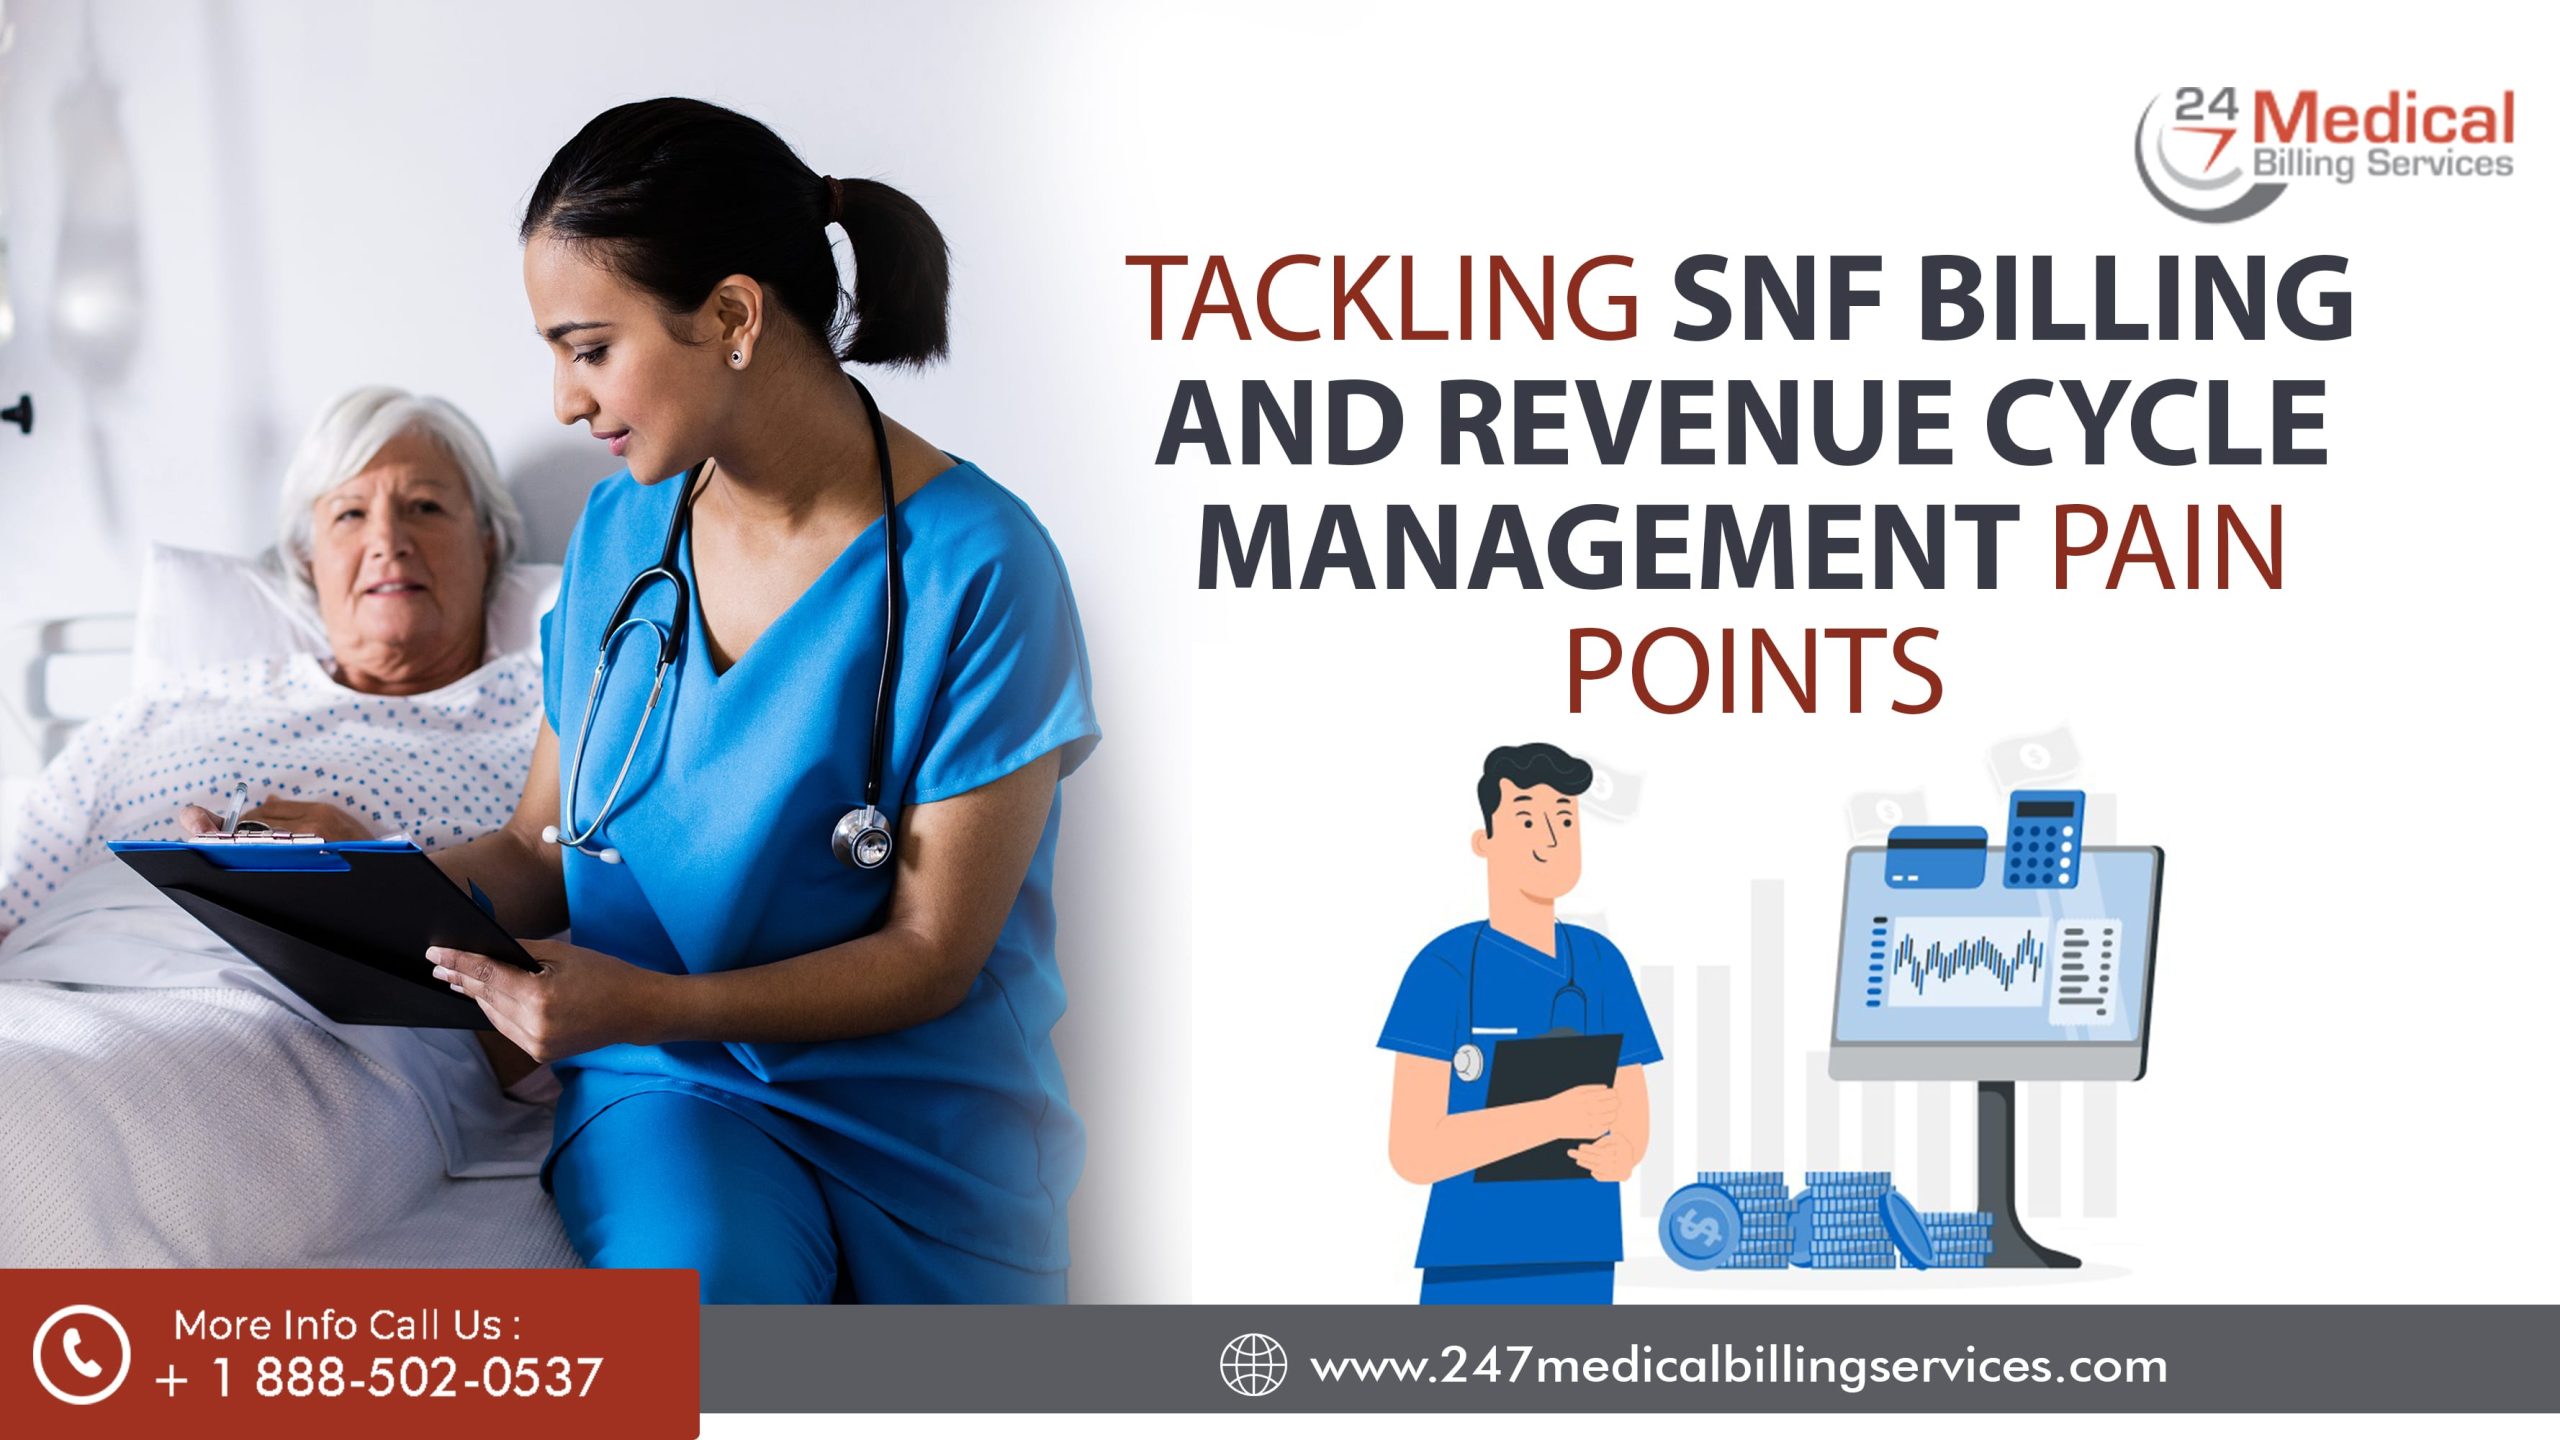  Tackling SNF Billing and Revenue Cycle Management Pain Points